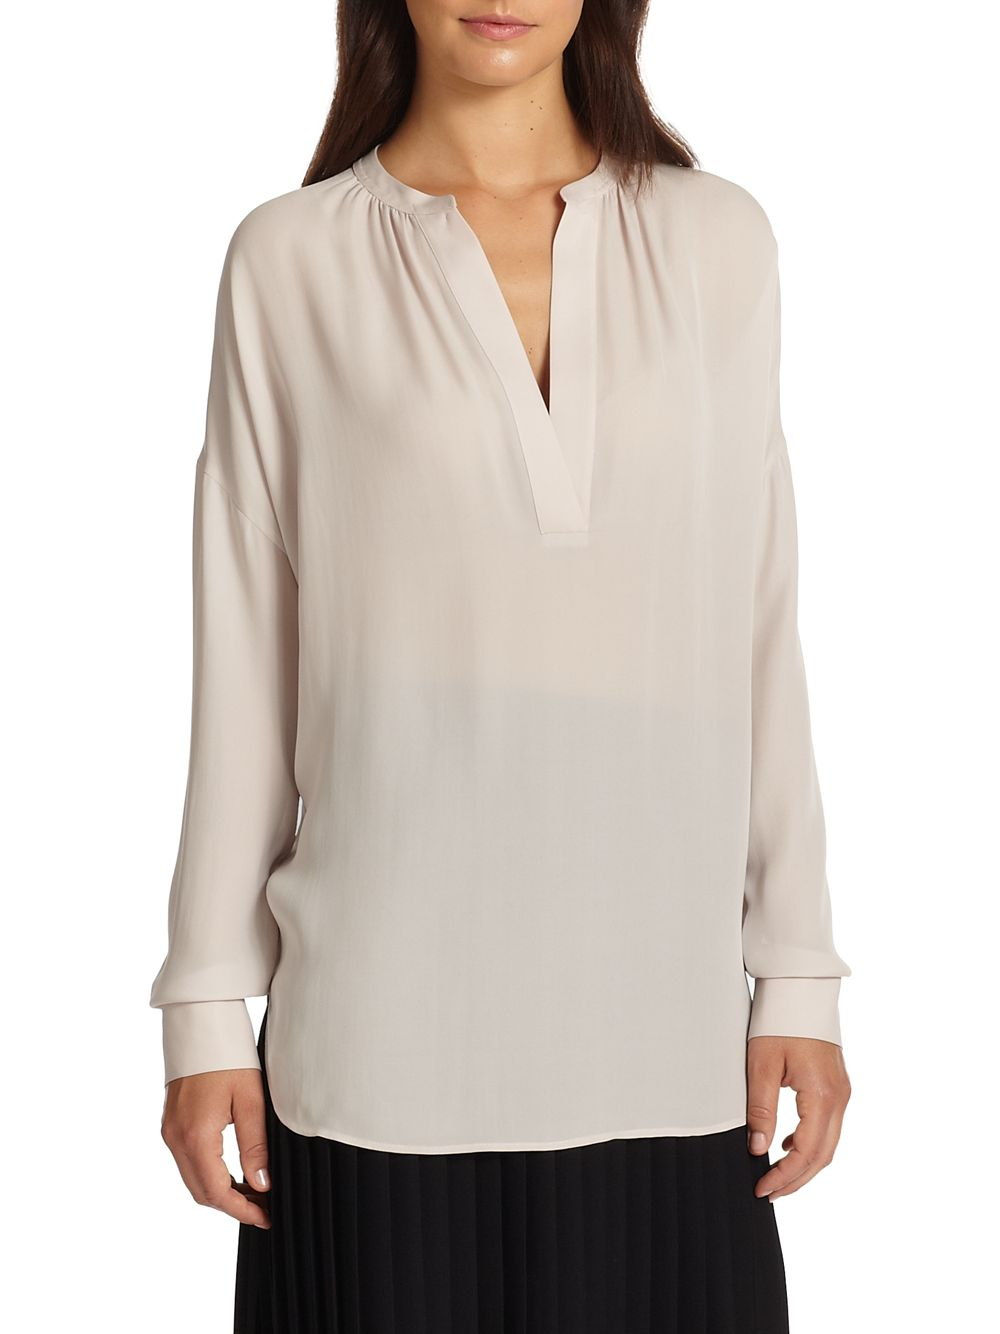 Lyst - Vince Silk Popover Blouse in White